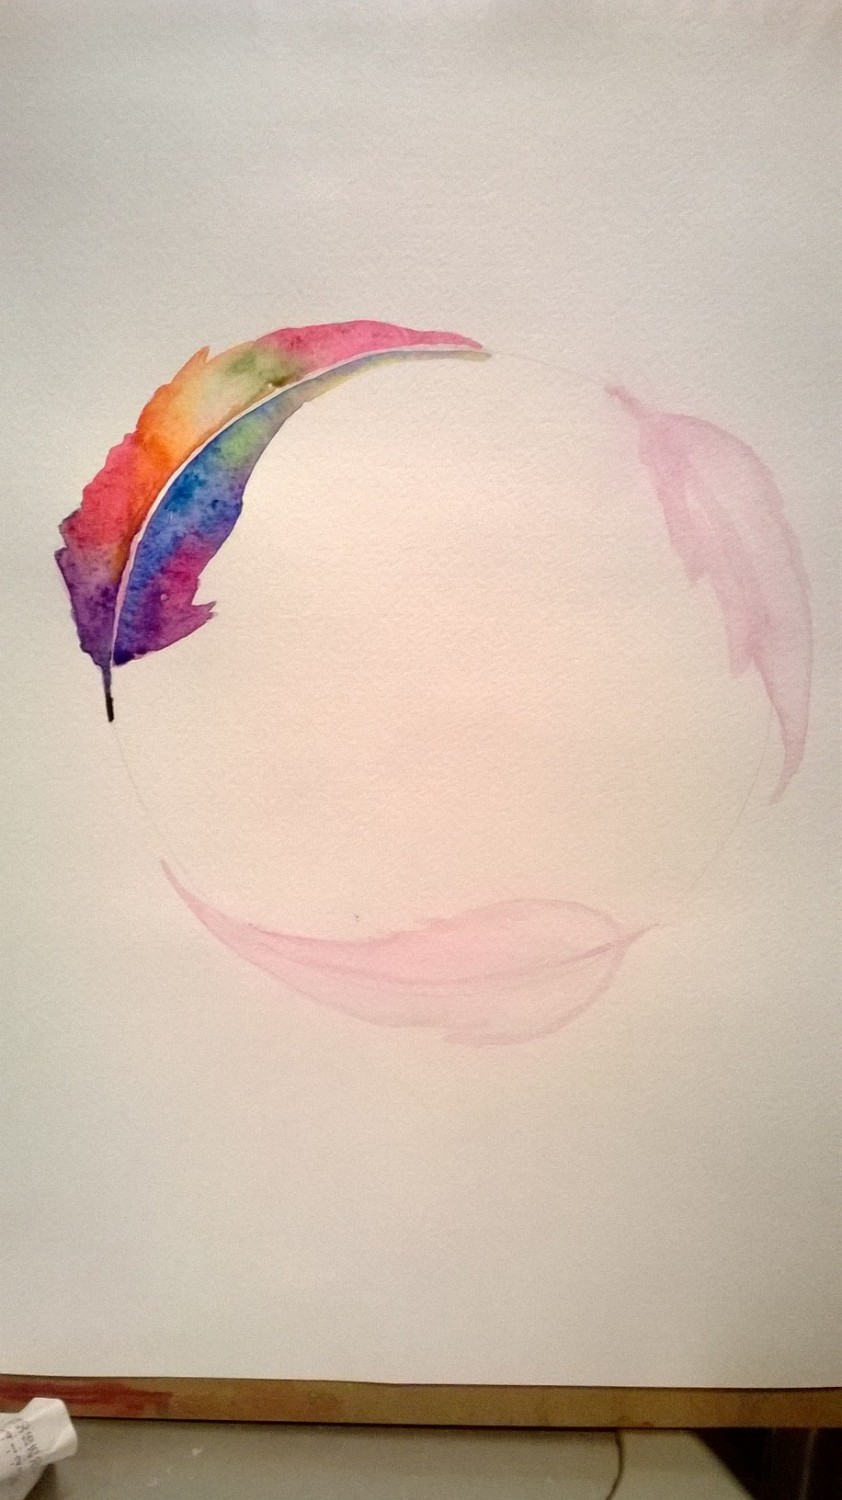 Work in Progress: Circle of Feathers